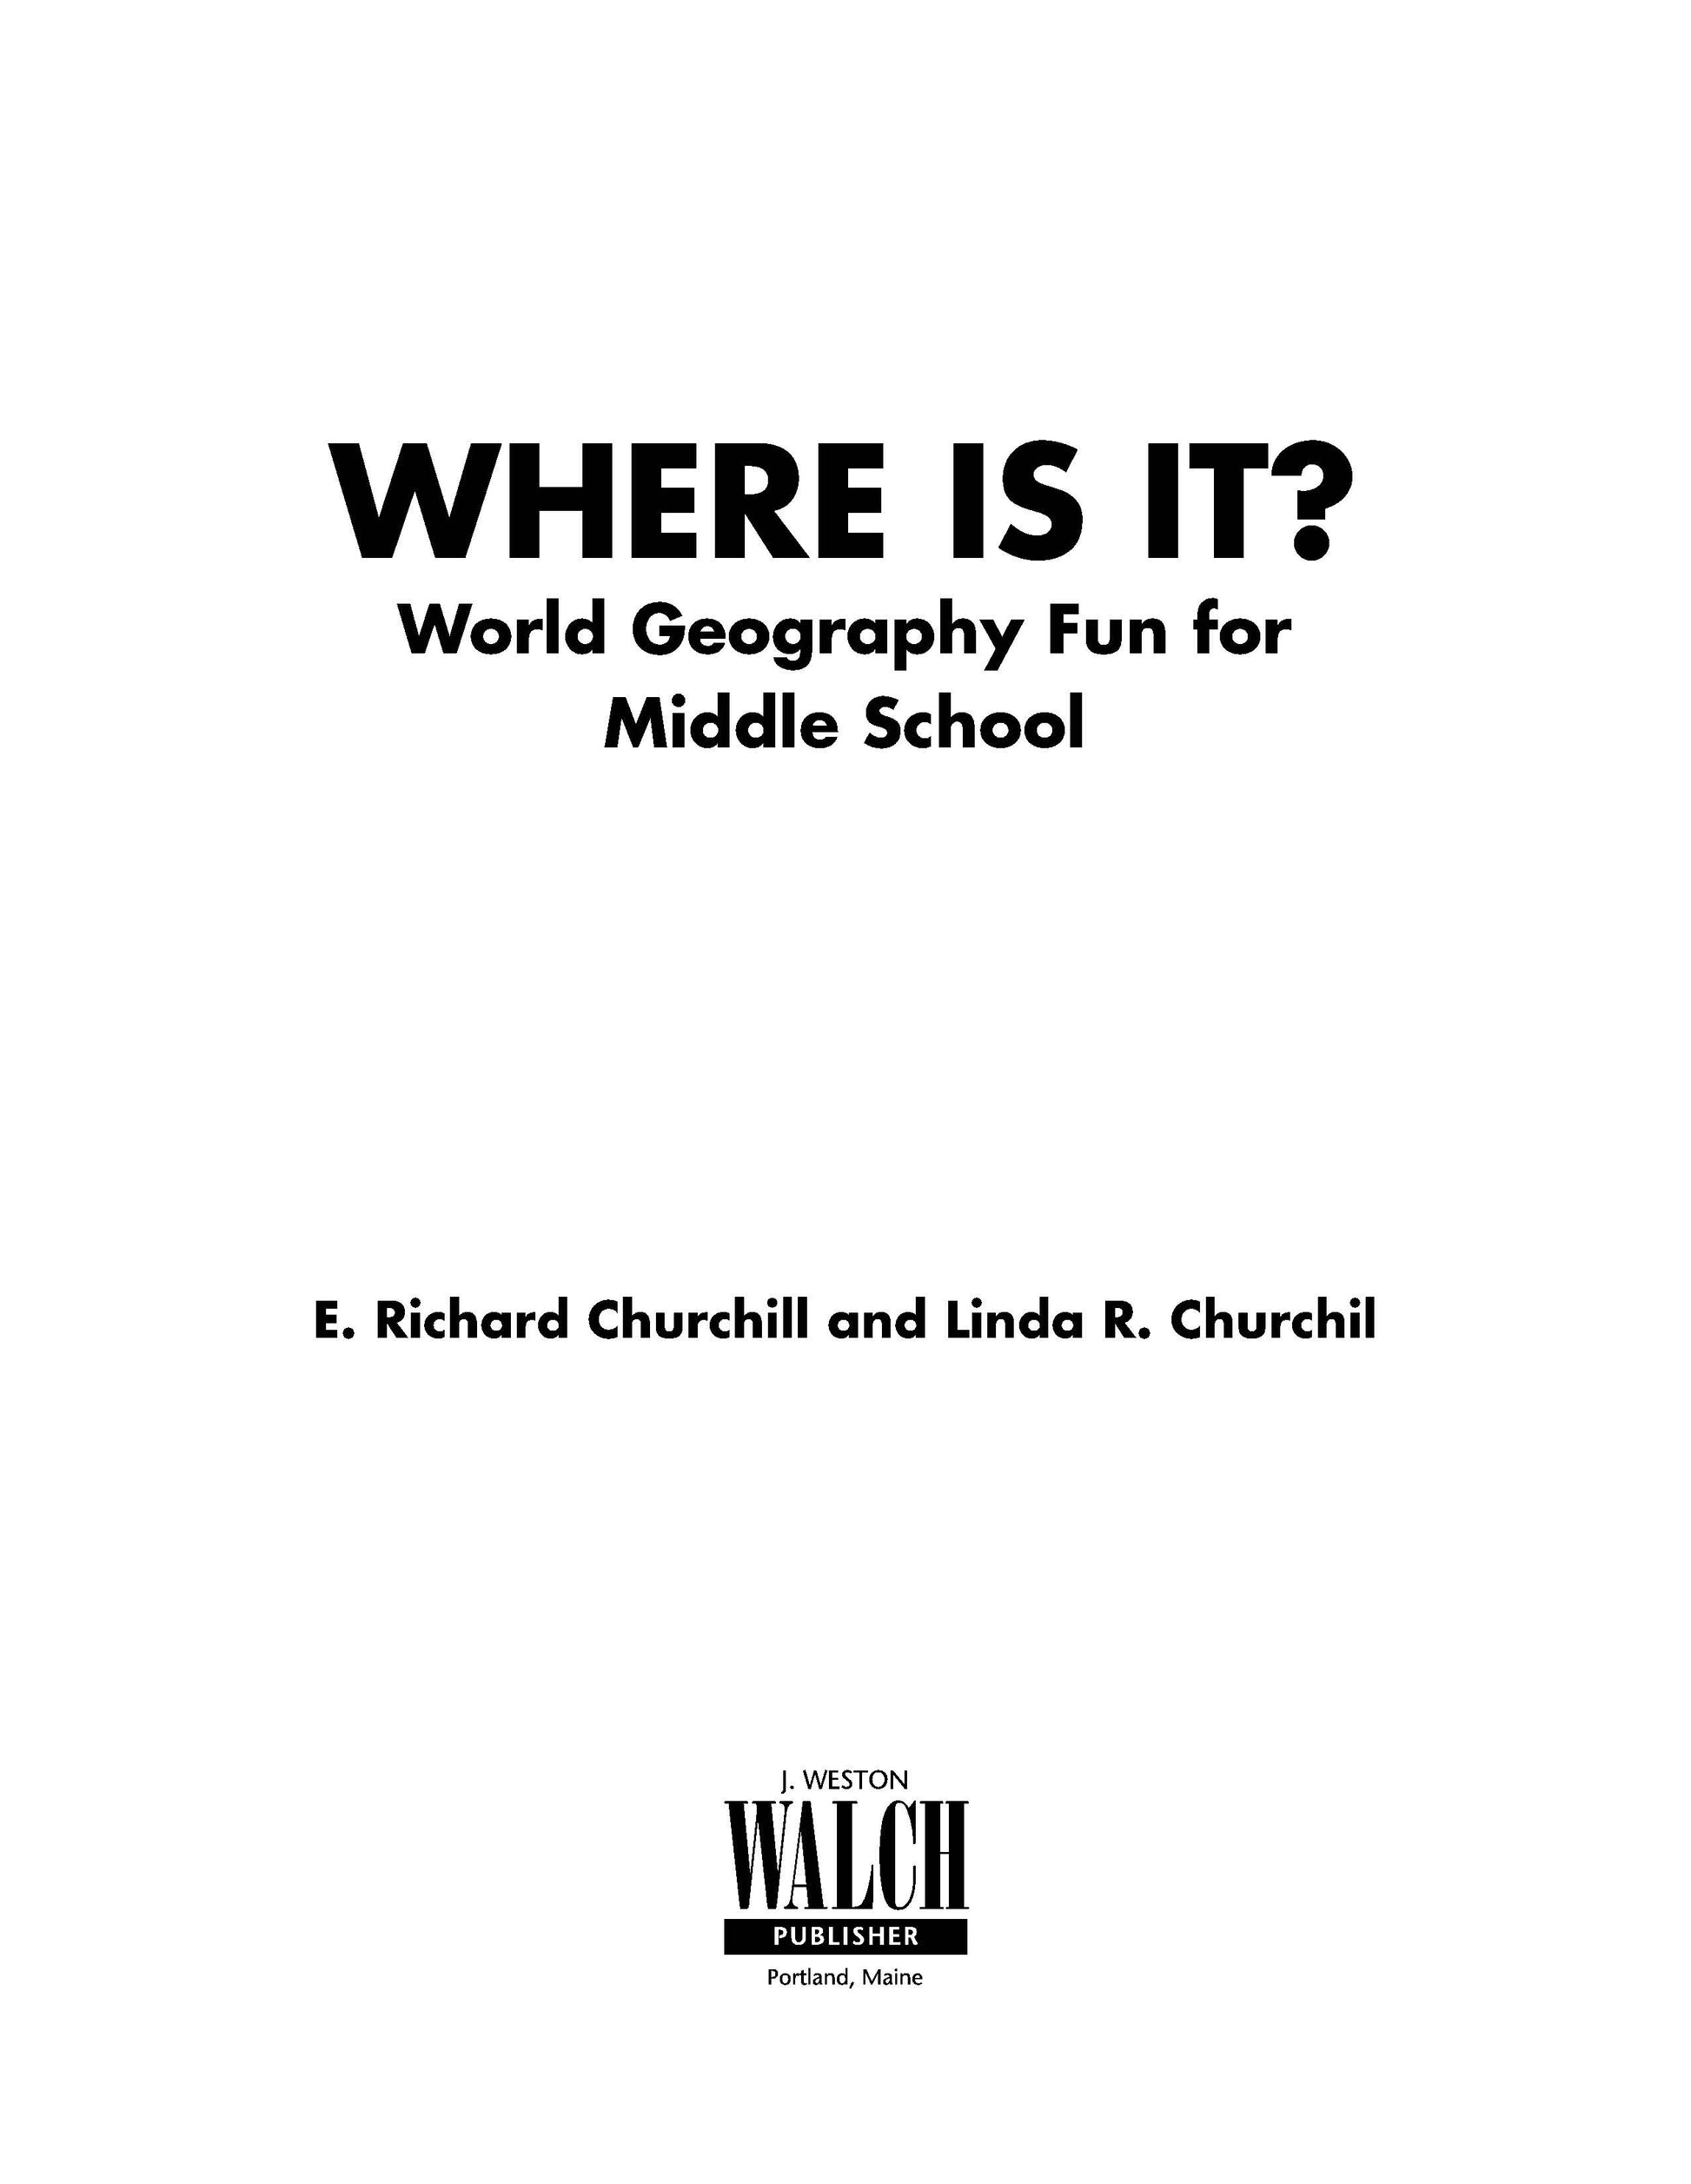 World Geography Fun, Geography Skills, Middle School Geography, Geography Worksheets, Latitude and Longitude, Physical and Political Features, Regional Geography, Educational Resources, Geography Curriculum, Map Crosswords, Quiz Questions, Answer Key, Geography Teachers, Humanities Education, School Geography.